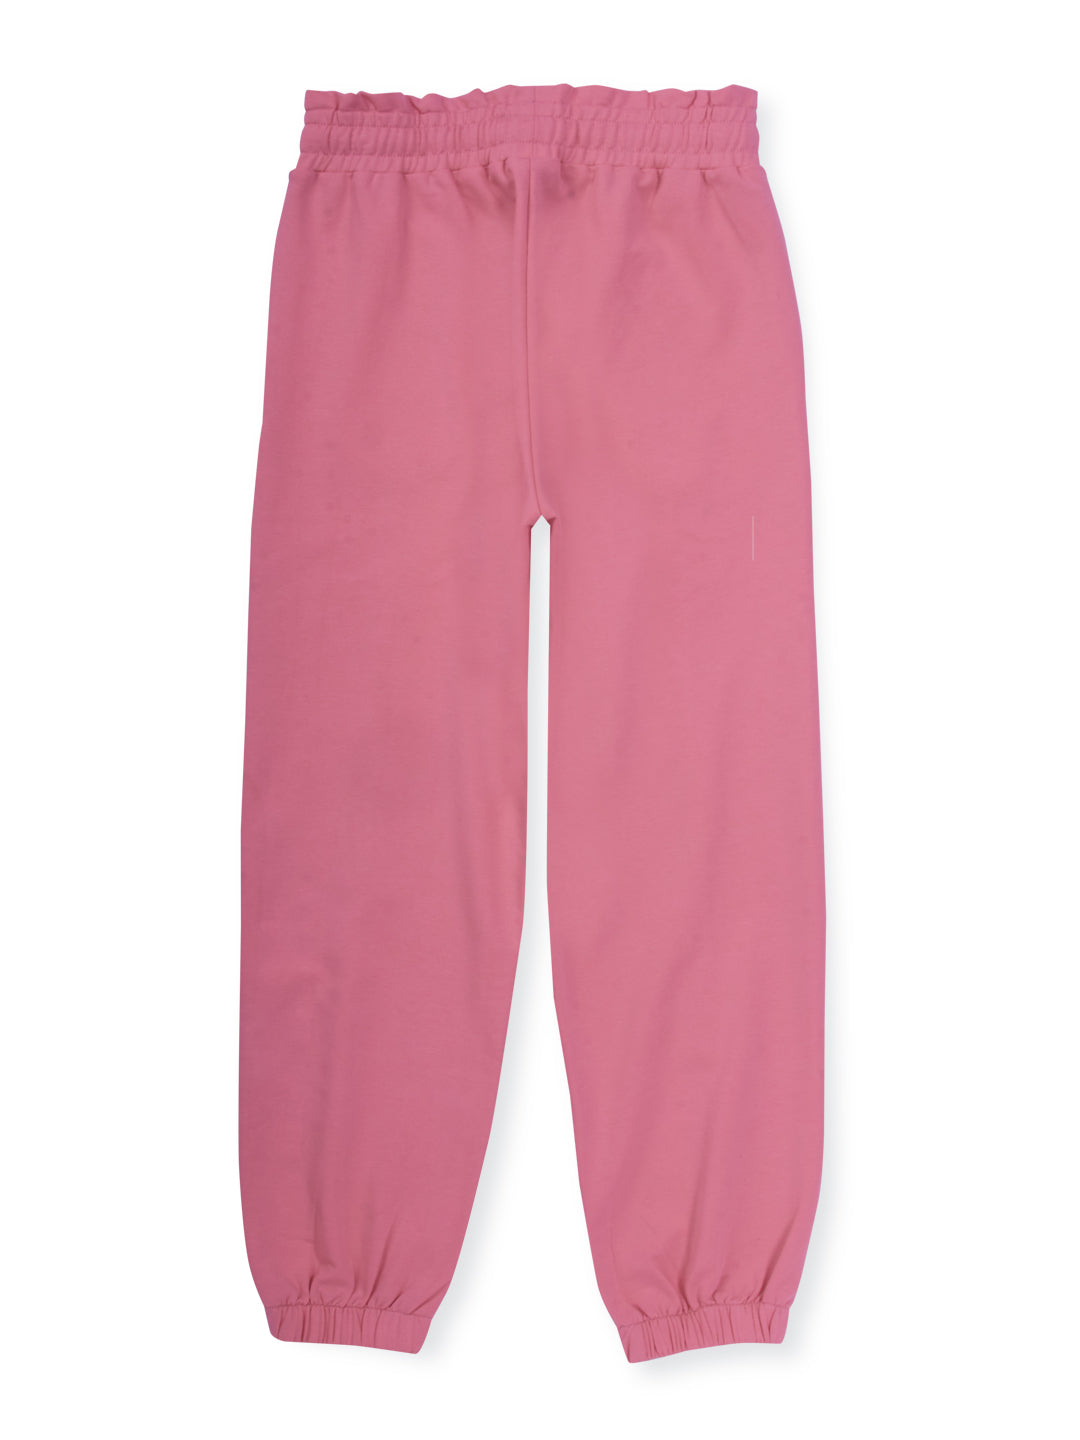 Girls Pink Cotton Solid Track Pant